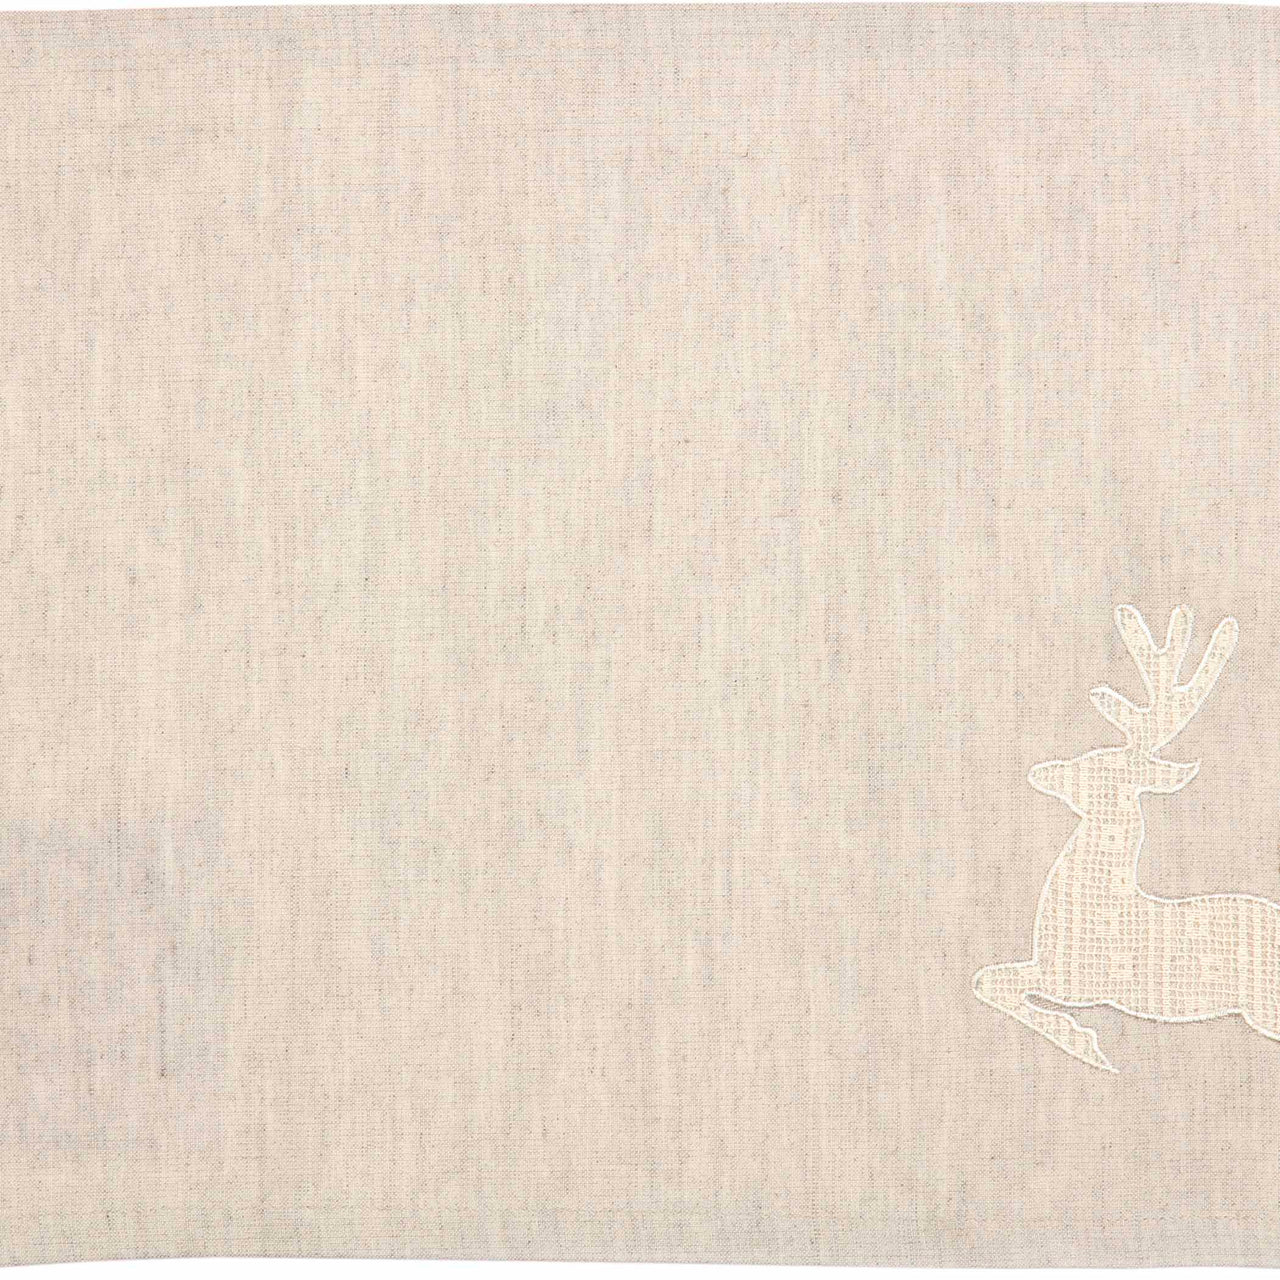 Creme Lace Deer Placemat Set of 6 12x18 VHC Brands